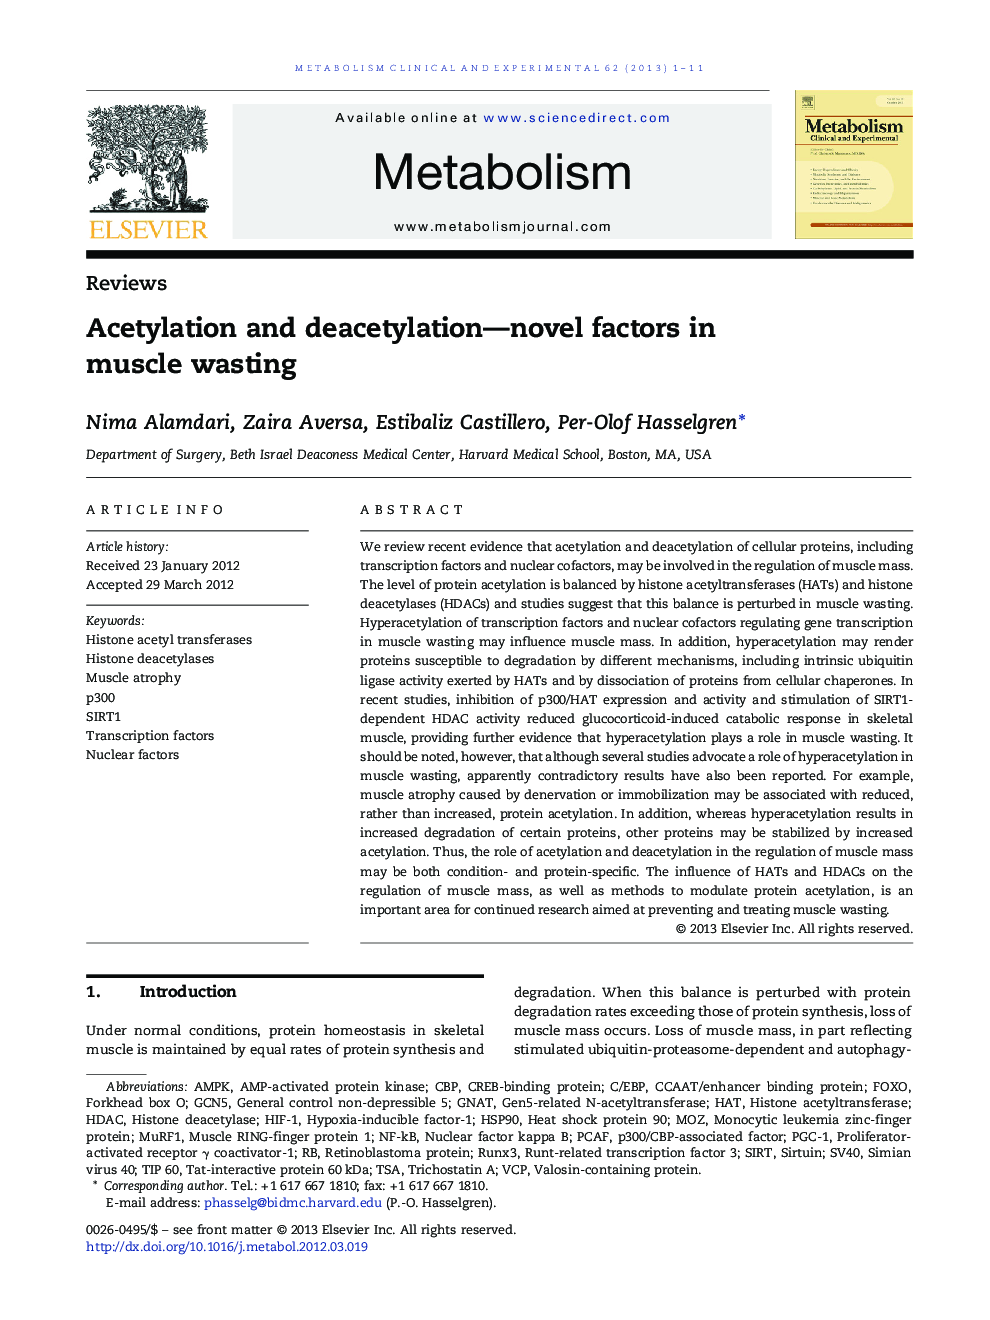 Acetylation and deacetylation—novel factors in muscle wasting